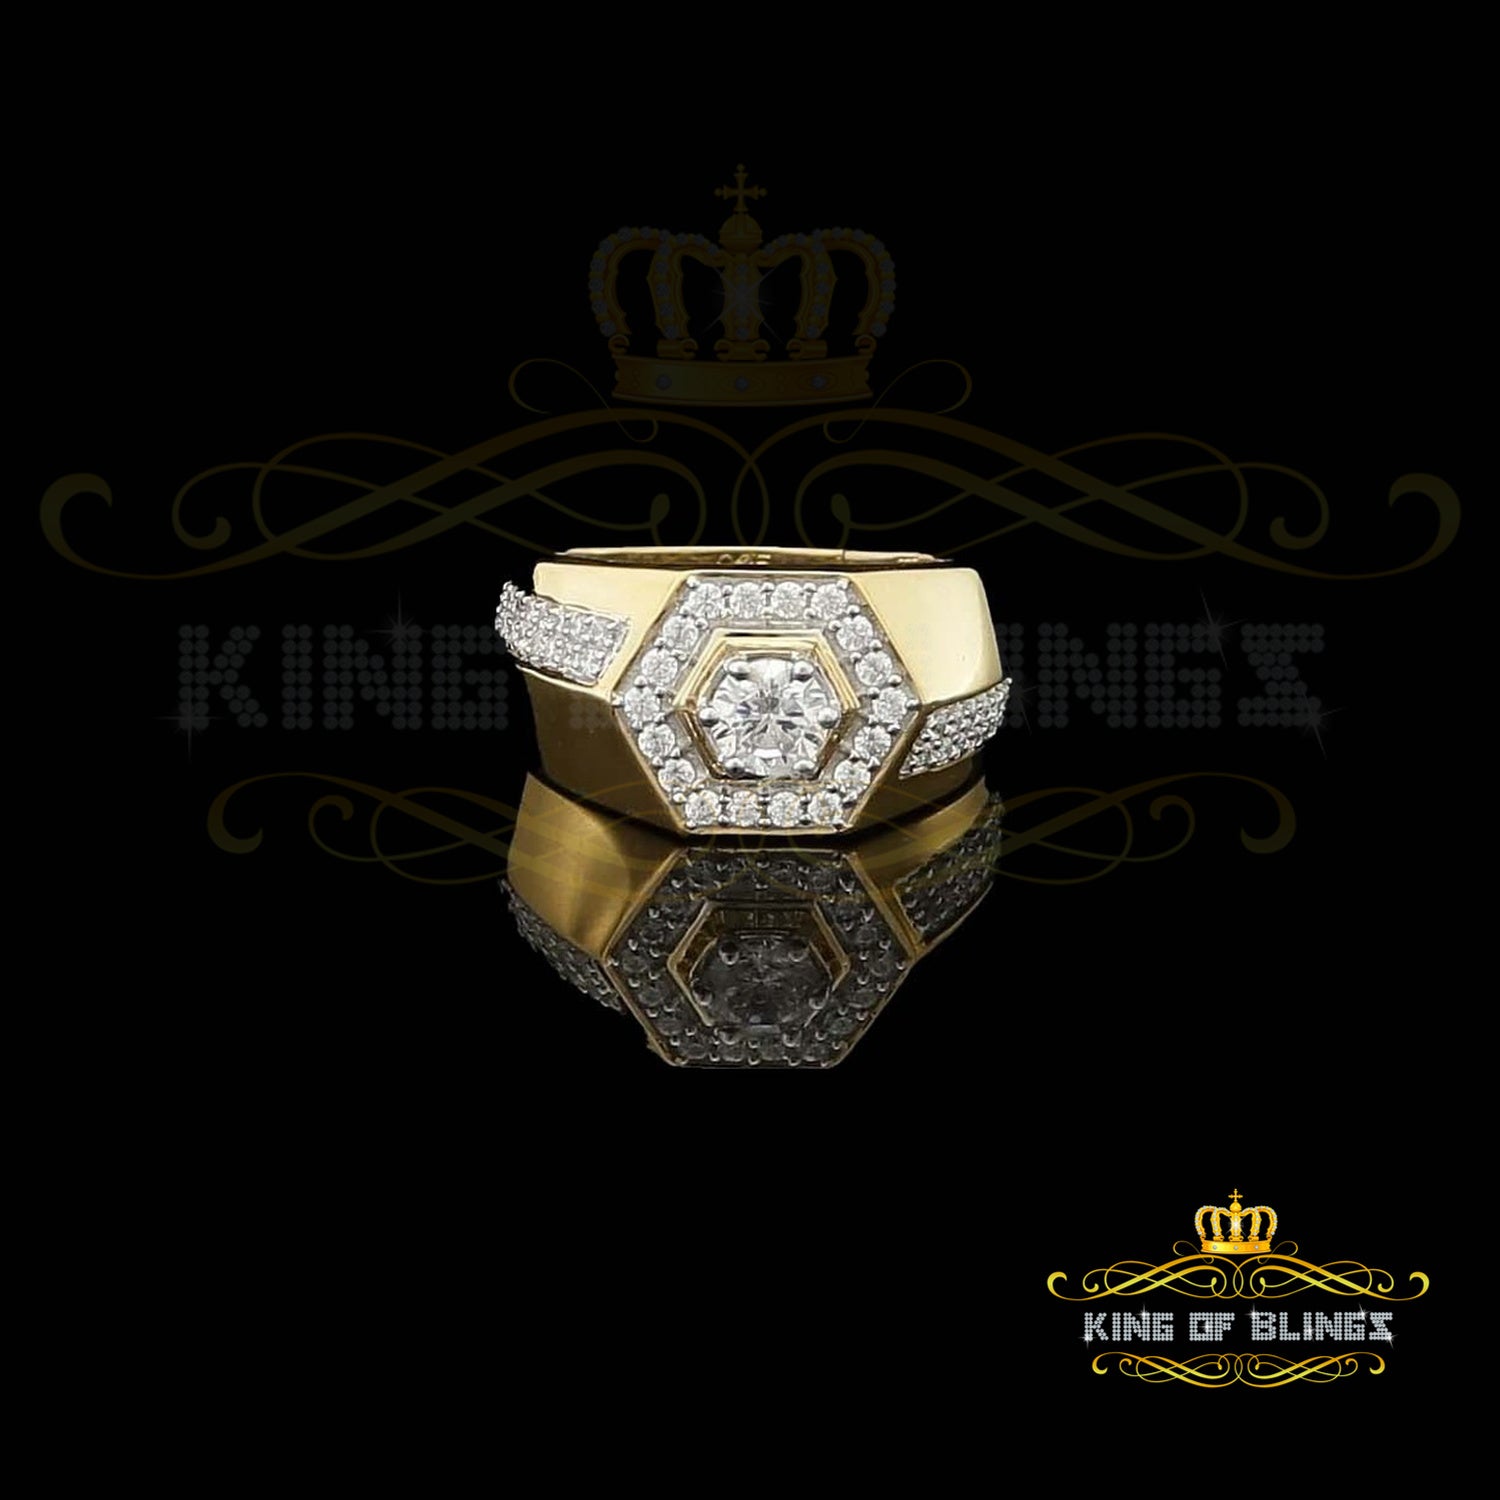 King Of Bling's 925 Yellow Silver Cubic Zirconia 2.50ct Men's Adjustable Ring From Size 8 to 10 KING OF BLINGS